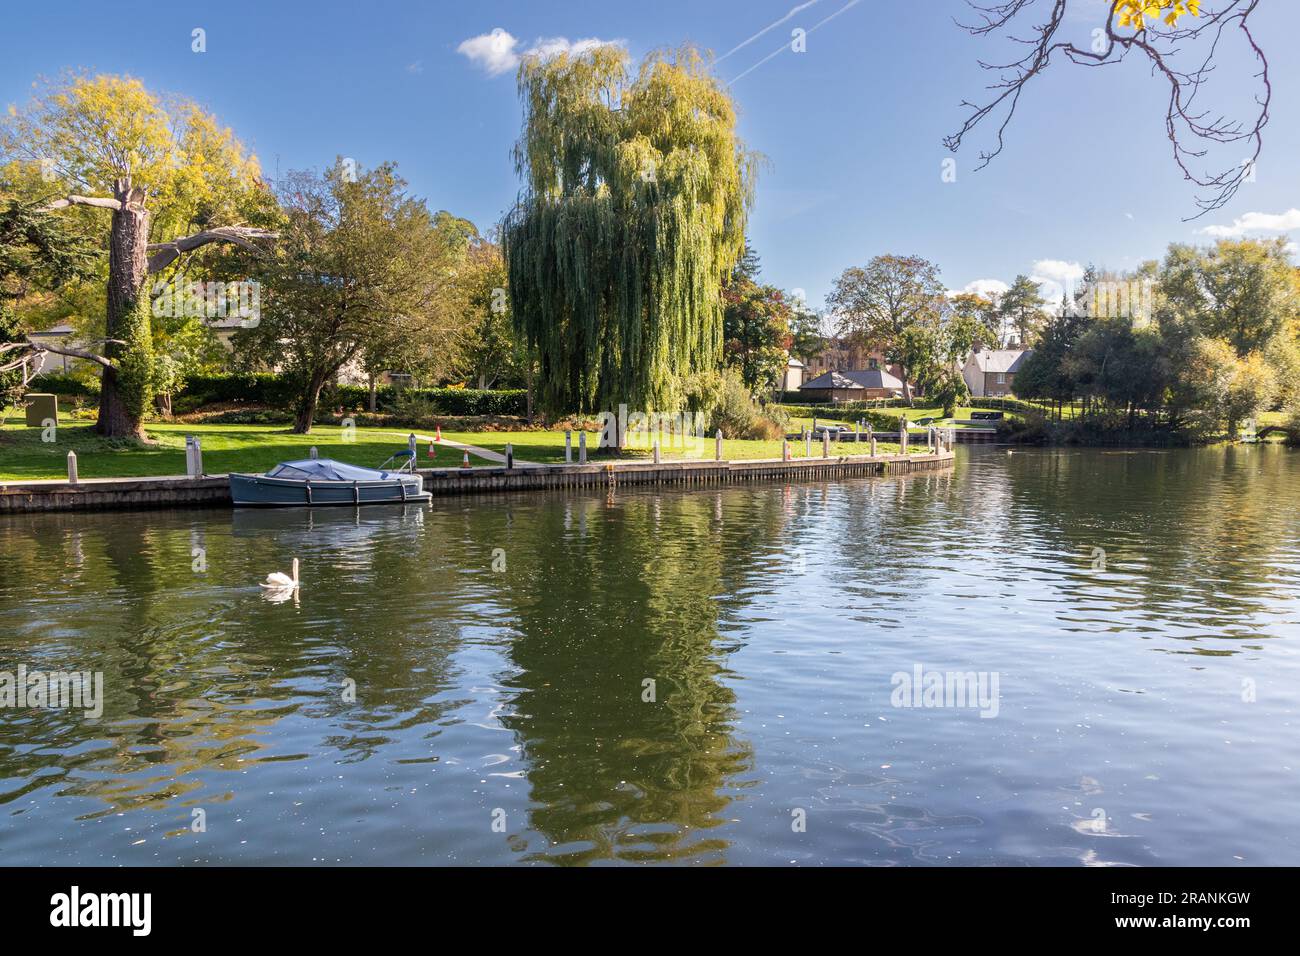 The River Thames at Maidenhead, Berkshire, England, UK on a sunny, Autumn day. Stock Photo